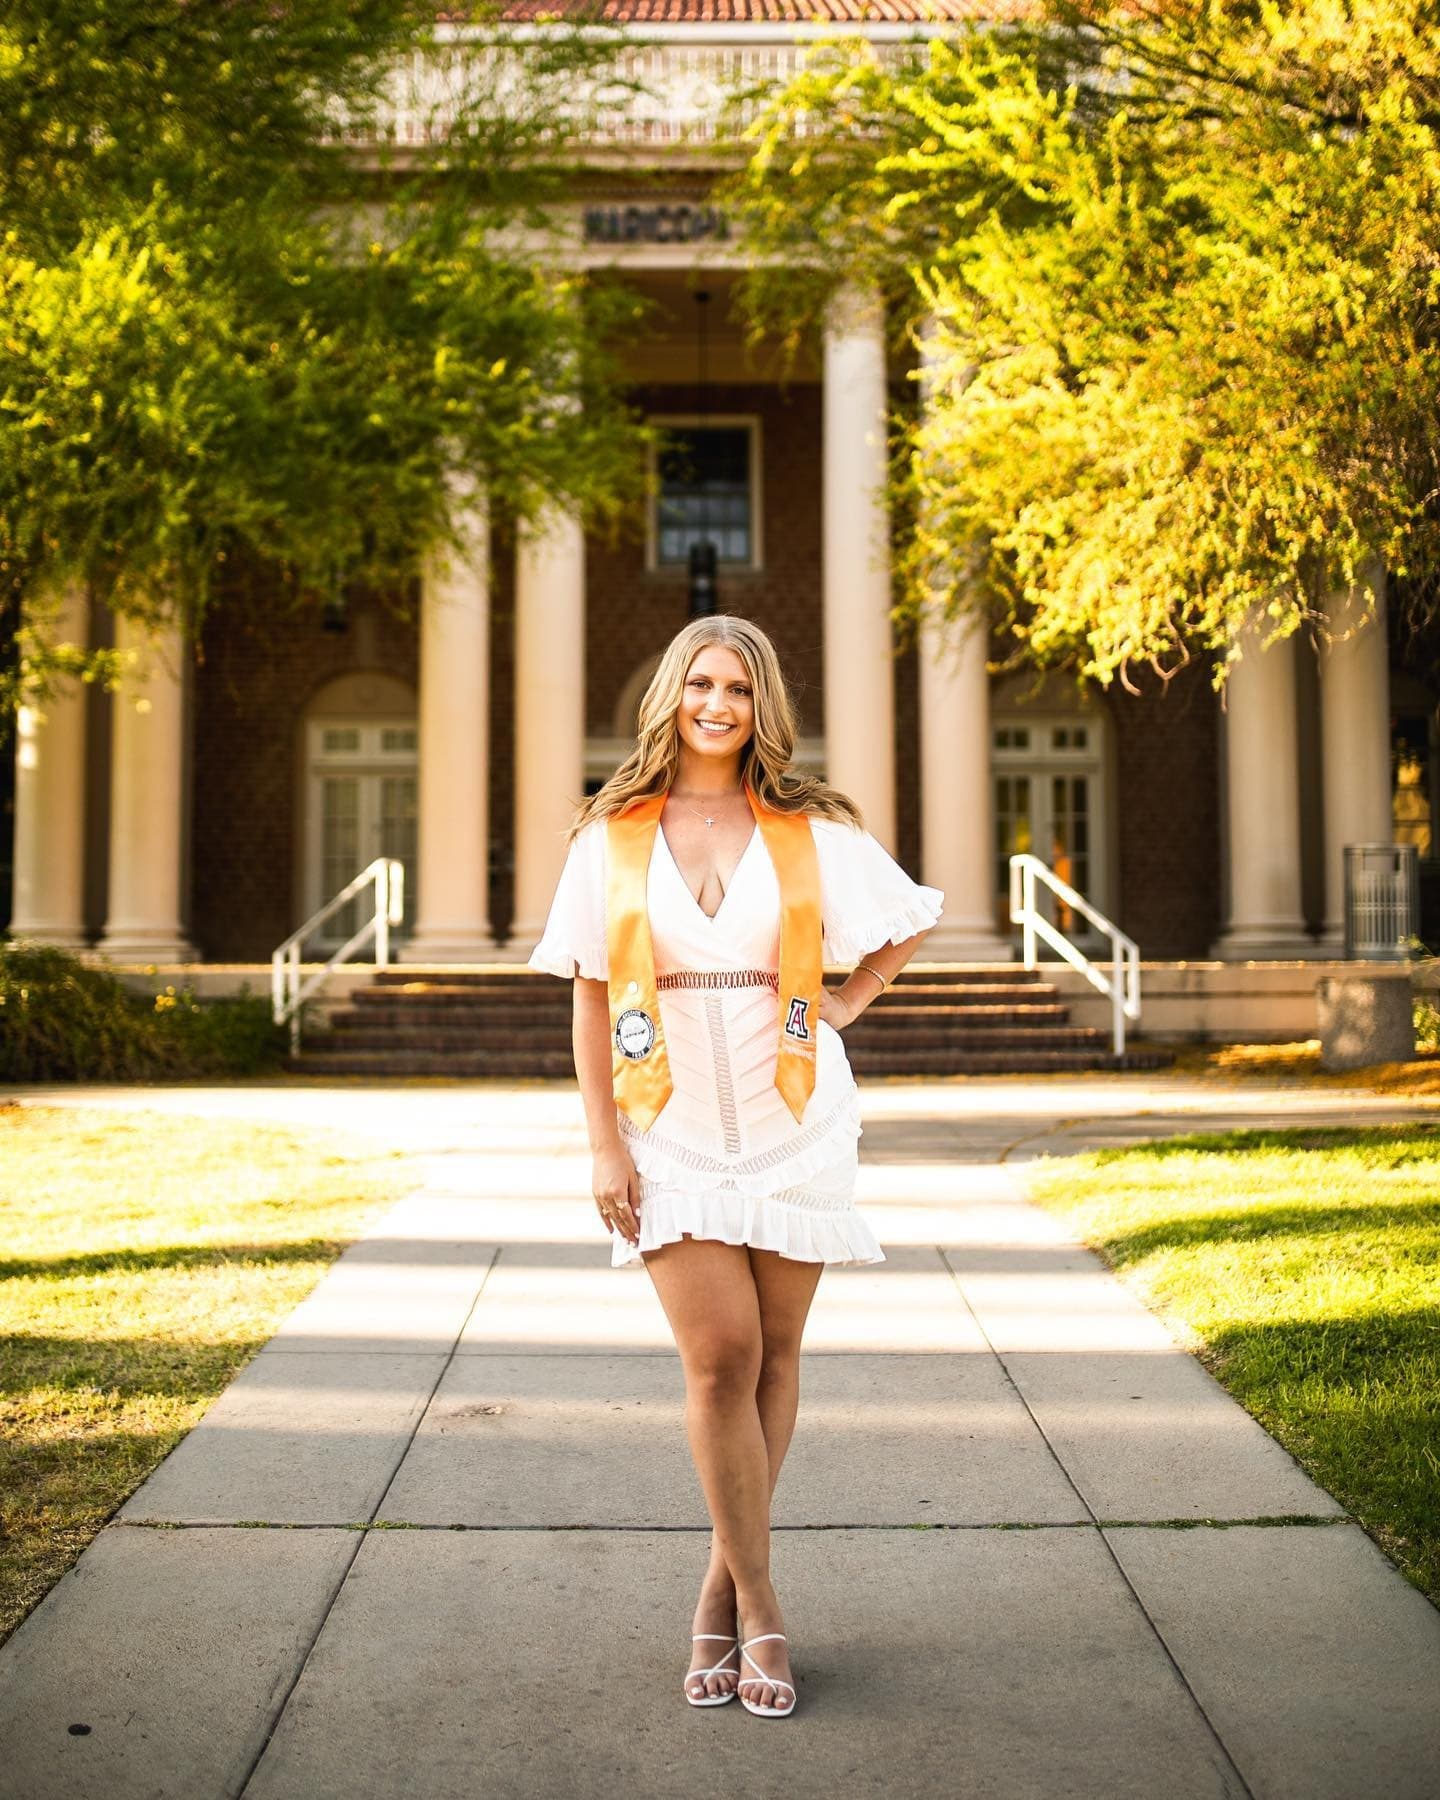 Capturing the Moment: Your Ultimate Guide to Graduation Photoshoots